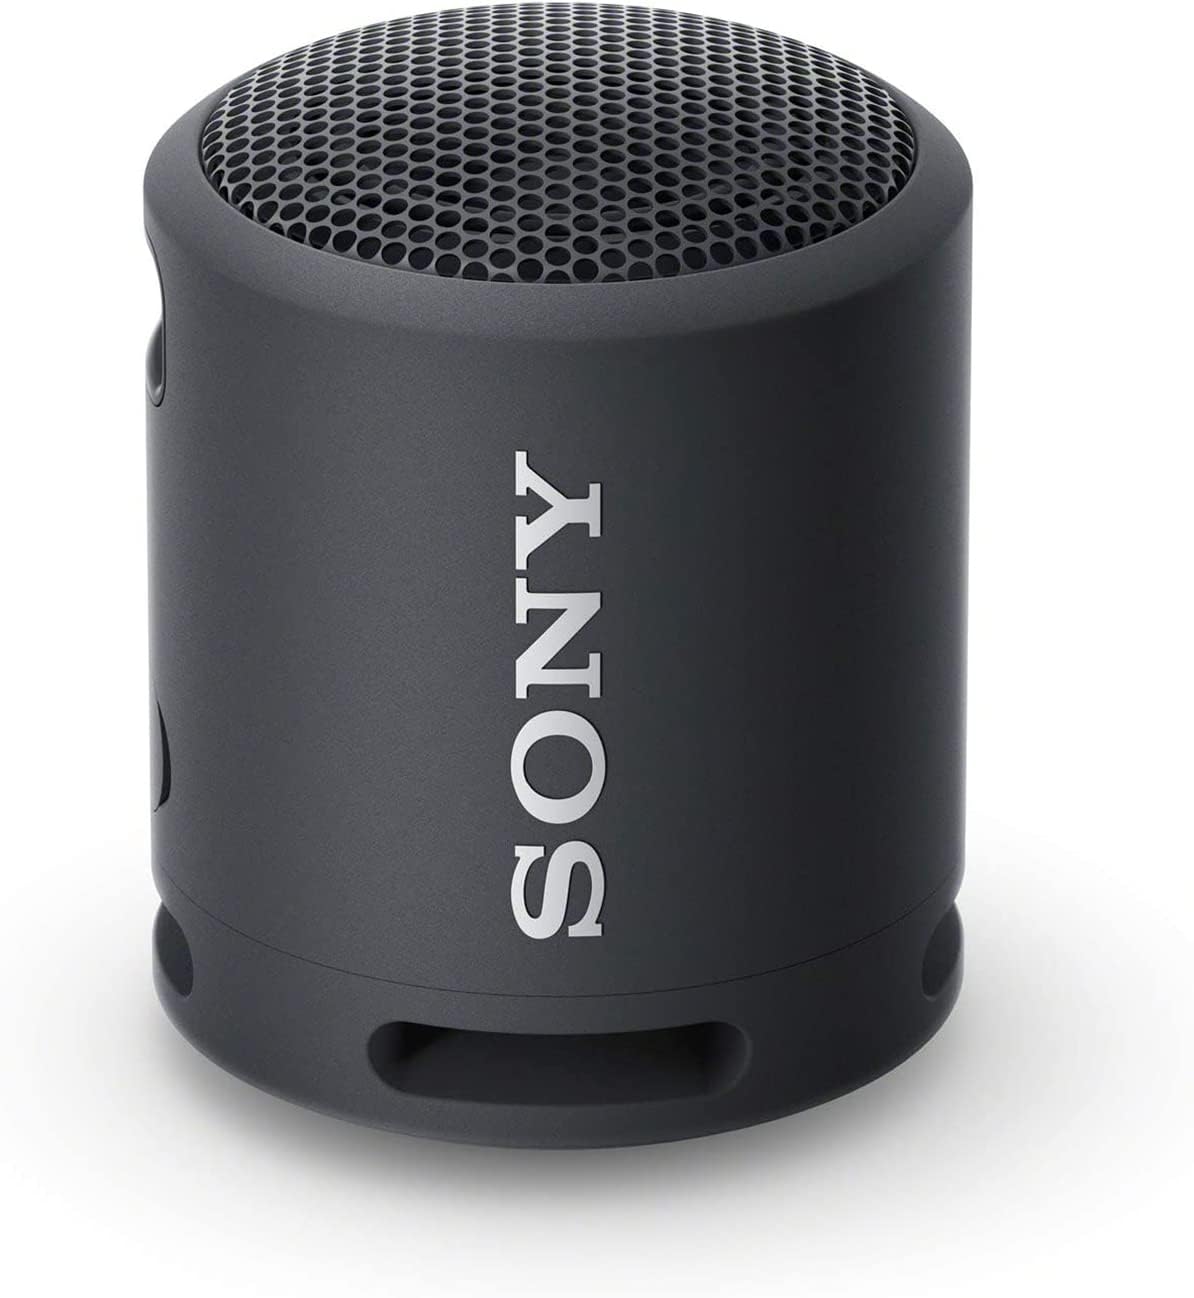 Review of Sony SRS-XB13 EXTRA BASS Wireless Bluetooth Portable Lightweight Compact Travel Speaker, Black